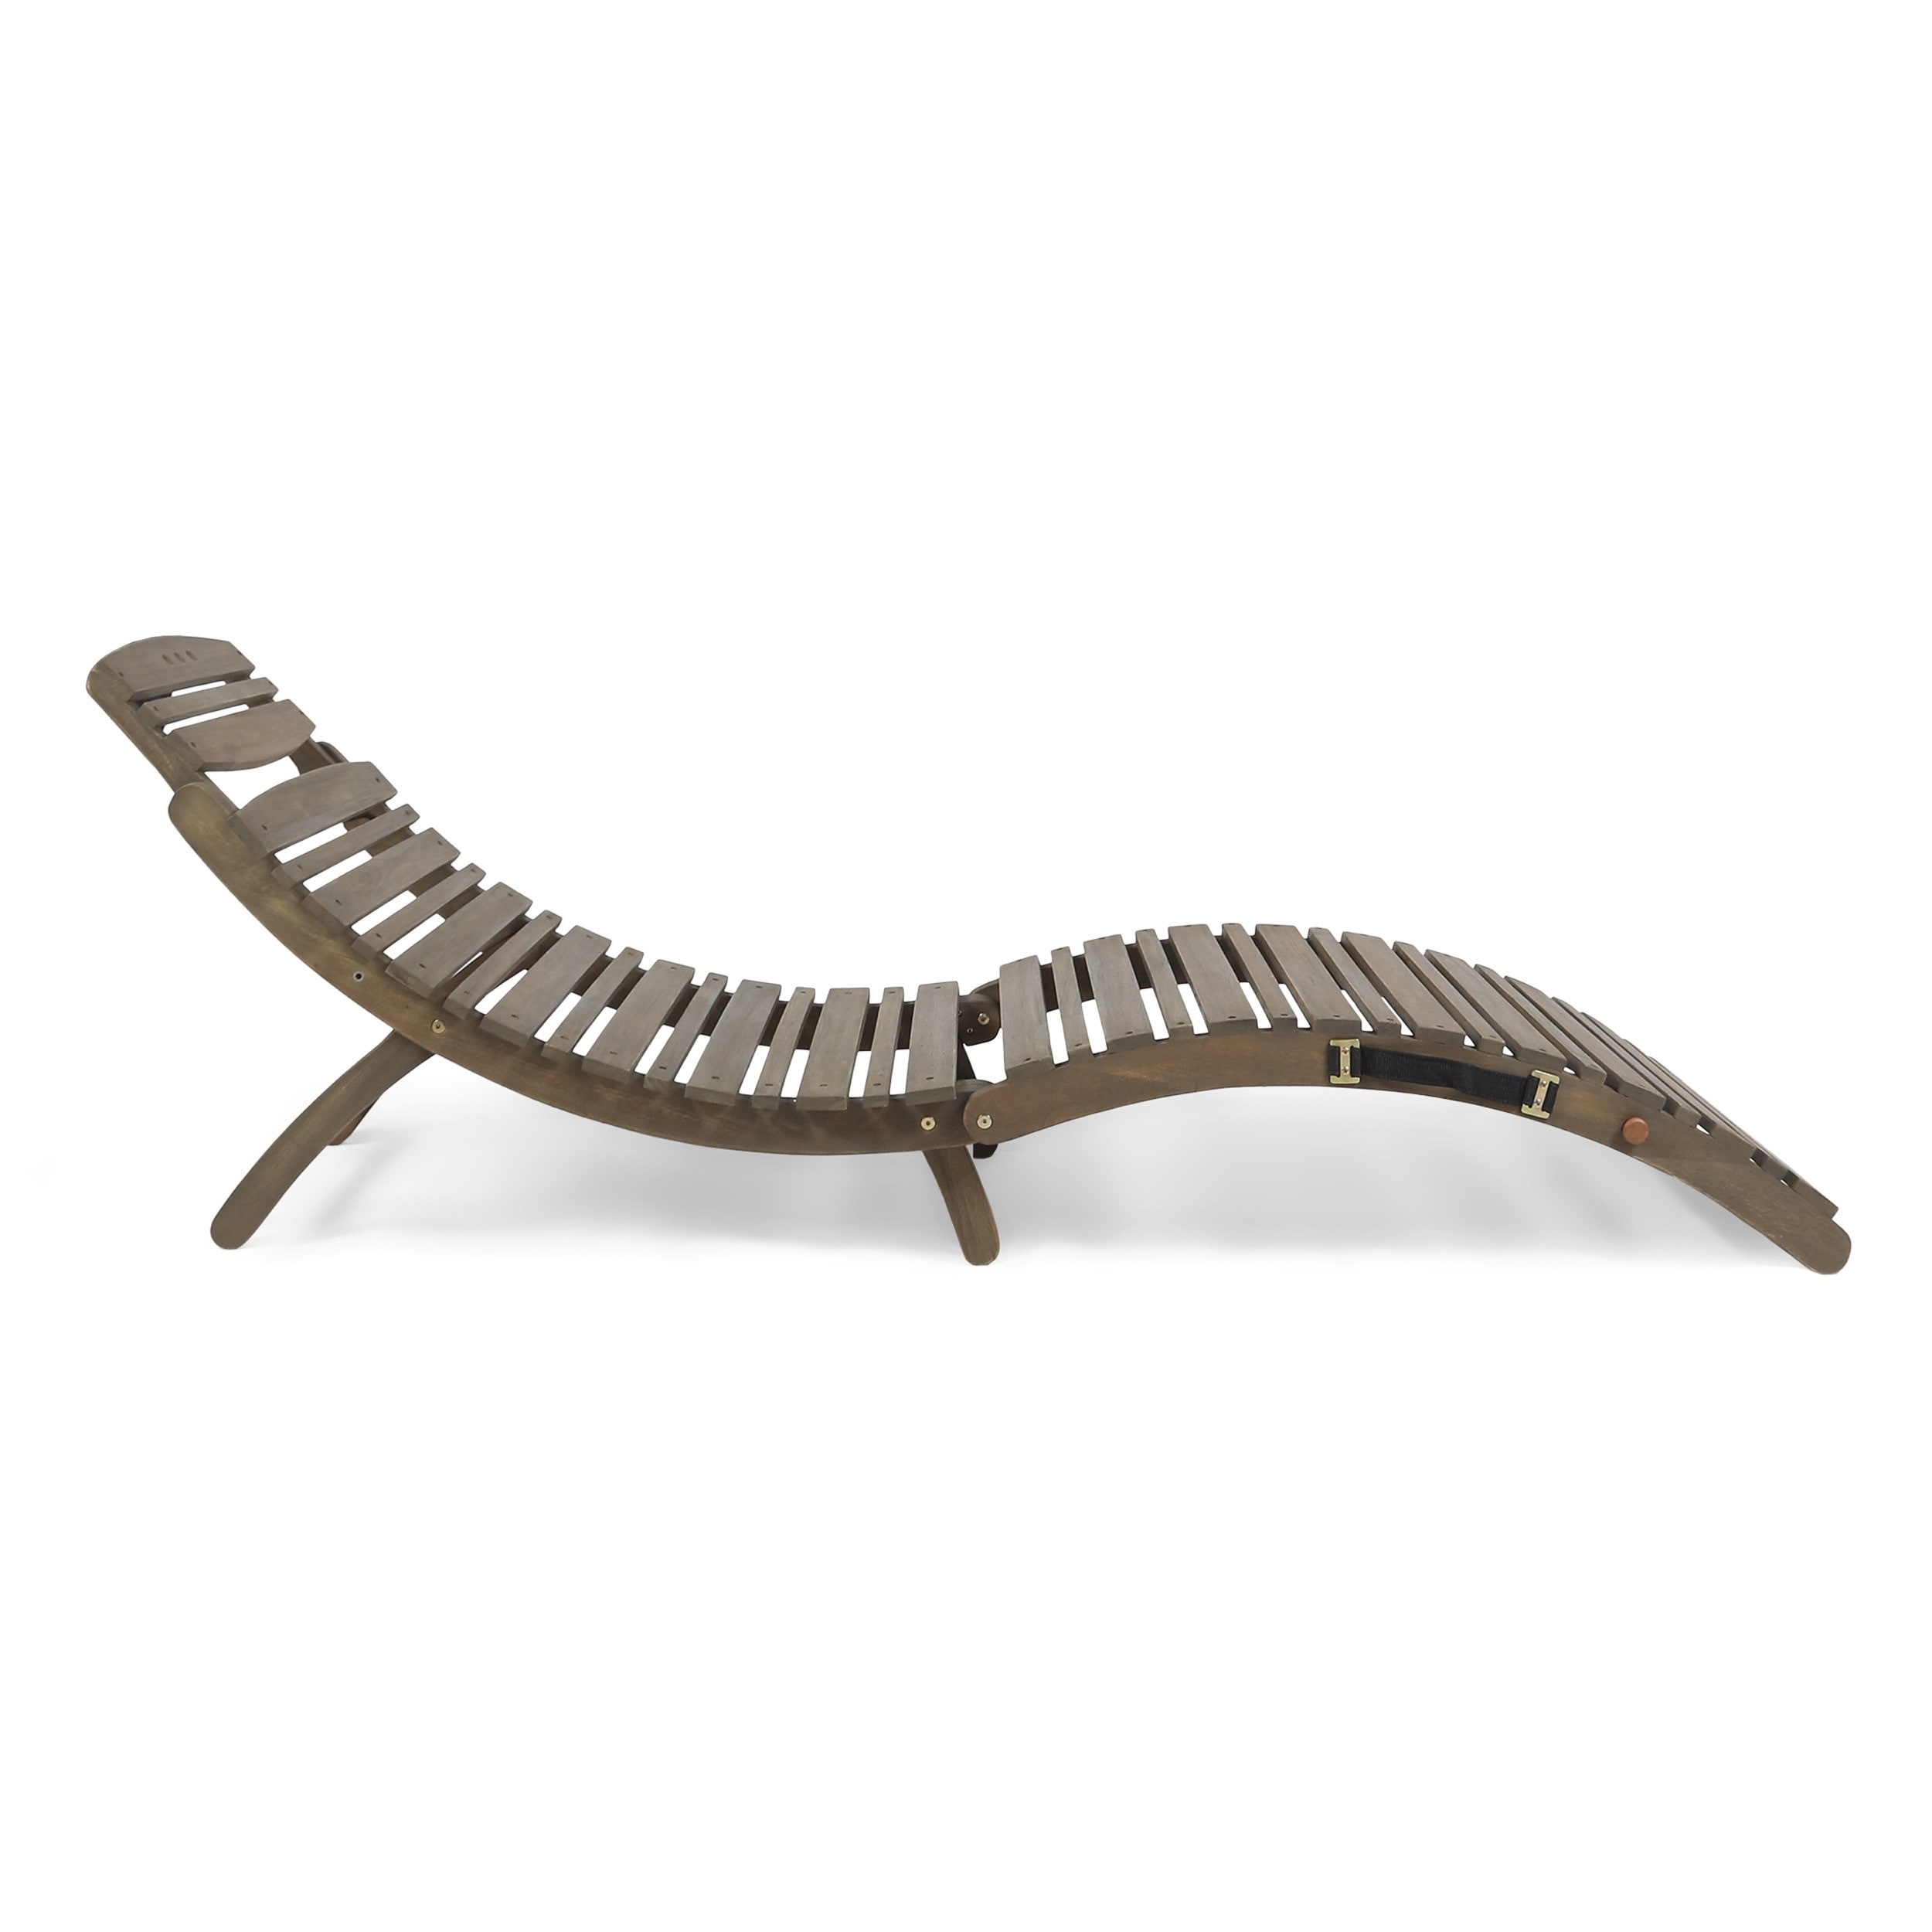 https://ak1.ostkcdn.com/images/products/is/images/direct/263f1d3a7bbac7c4ae25d350fc06dc0452100c18/Lahaina-Acacia-Wood-Outdoor-Chaise-Lounge-by-Christopher-Knight-Home.jpg